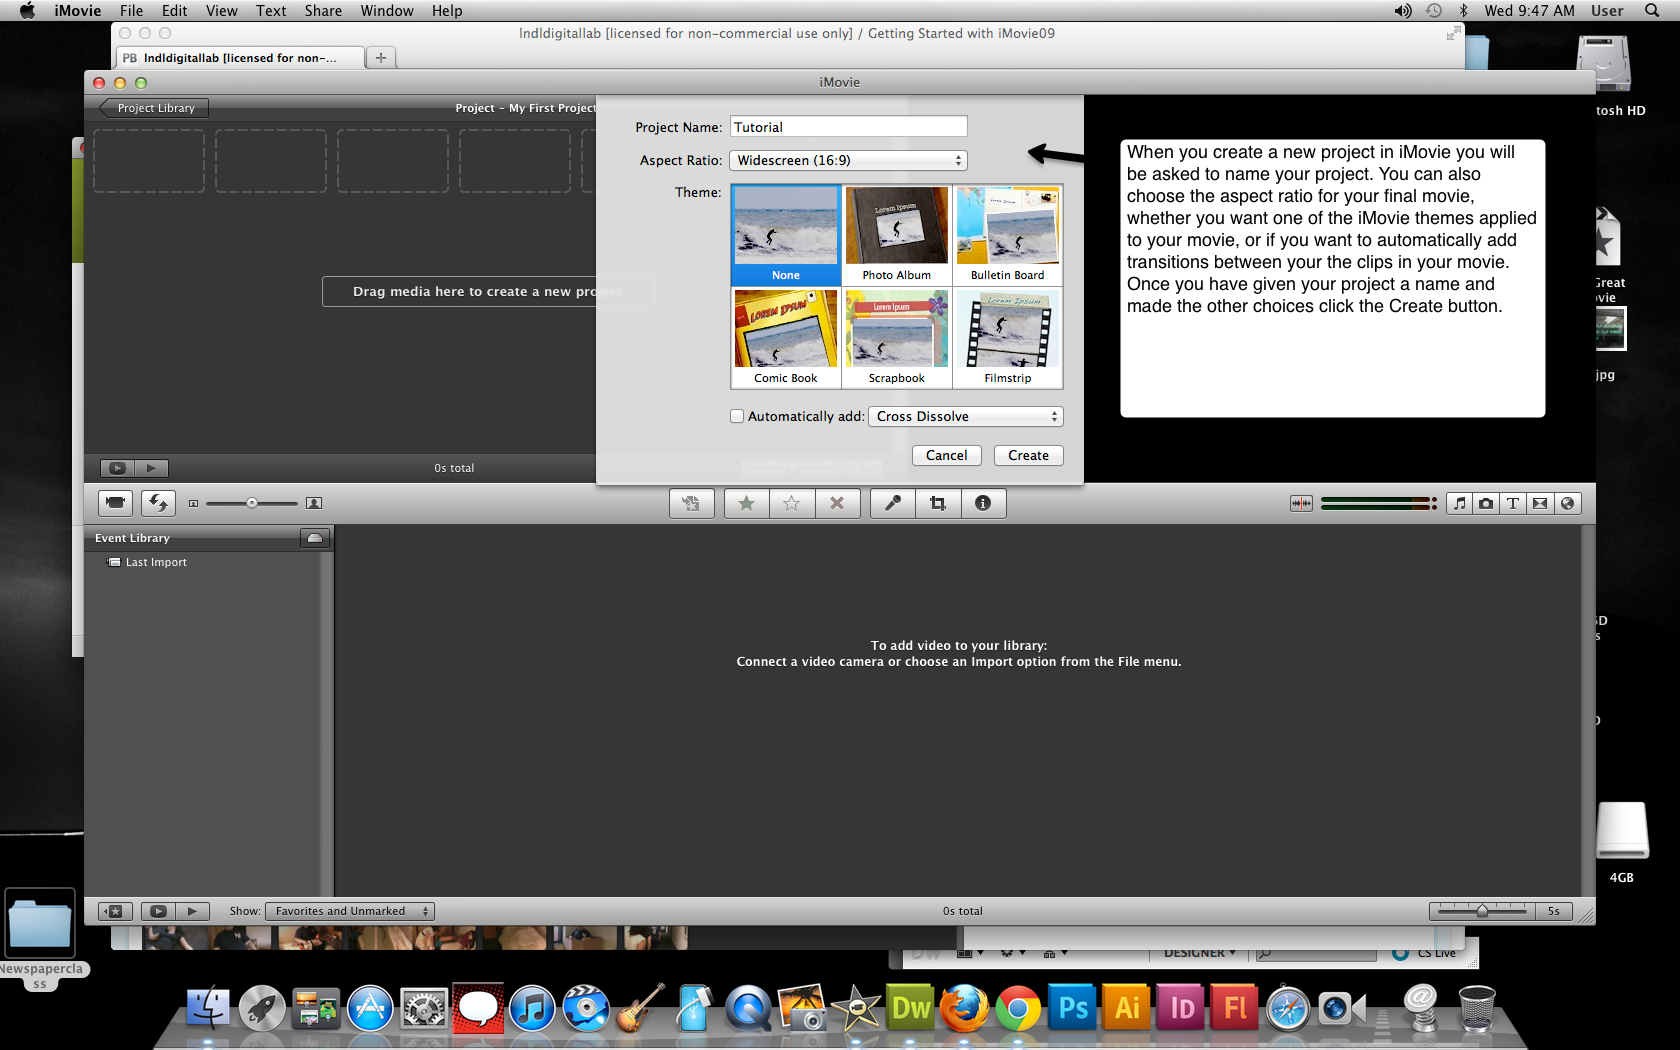 Visual guide on how to create a new project in iMovie '11